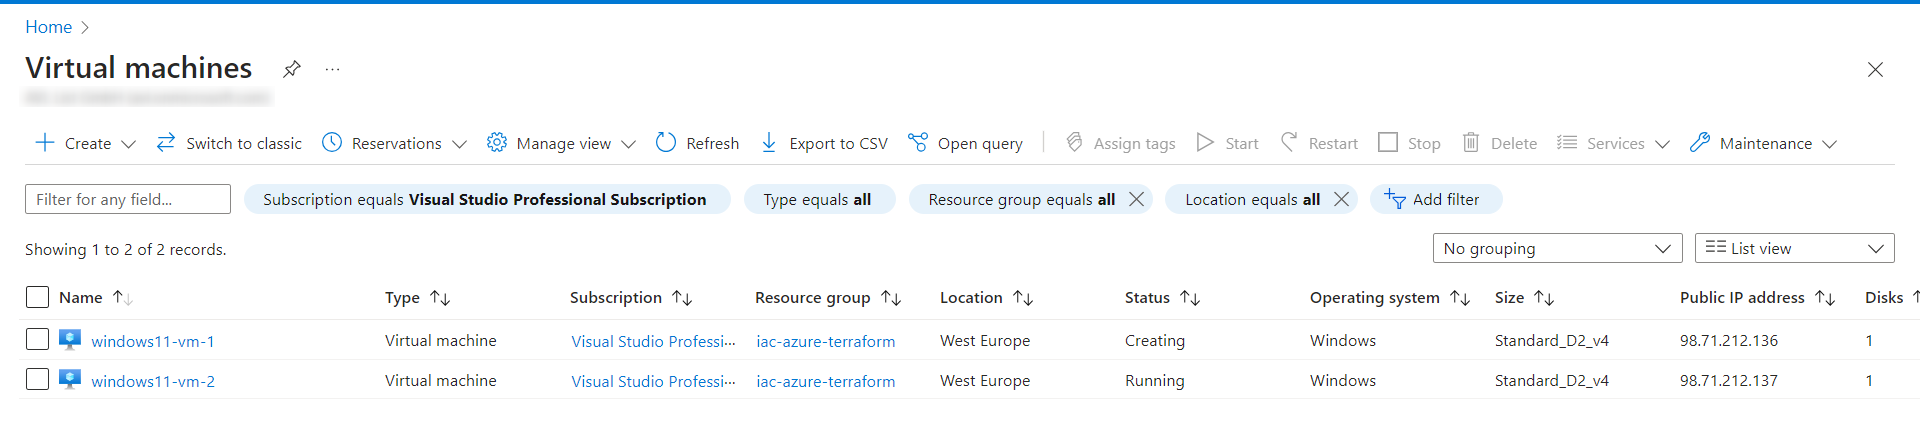 azure_two_win11_vms_overview